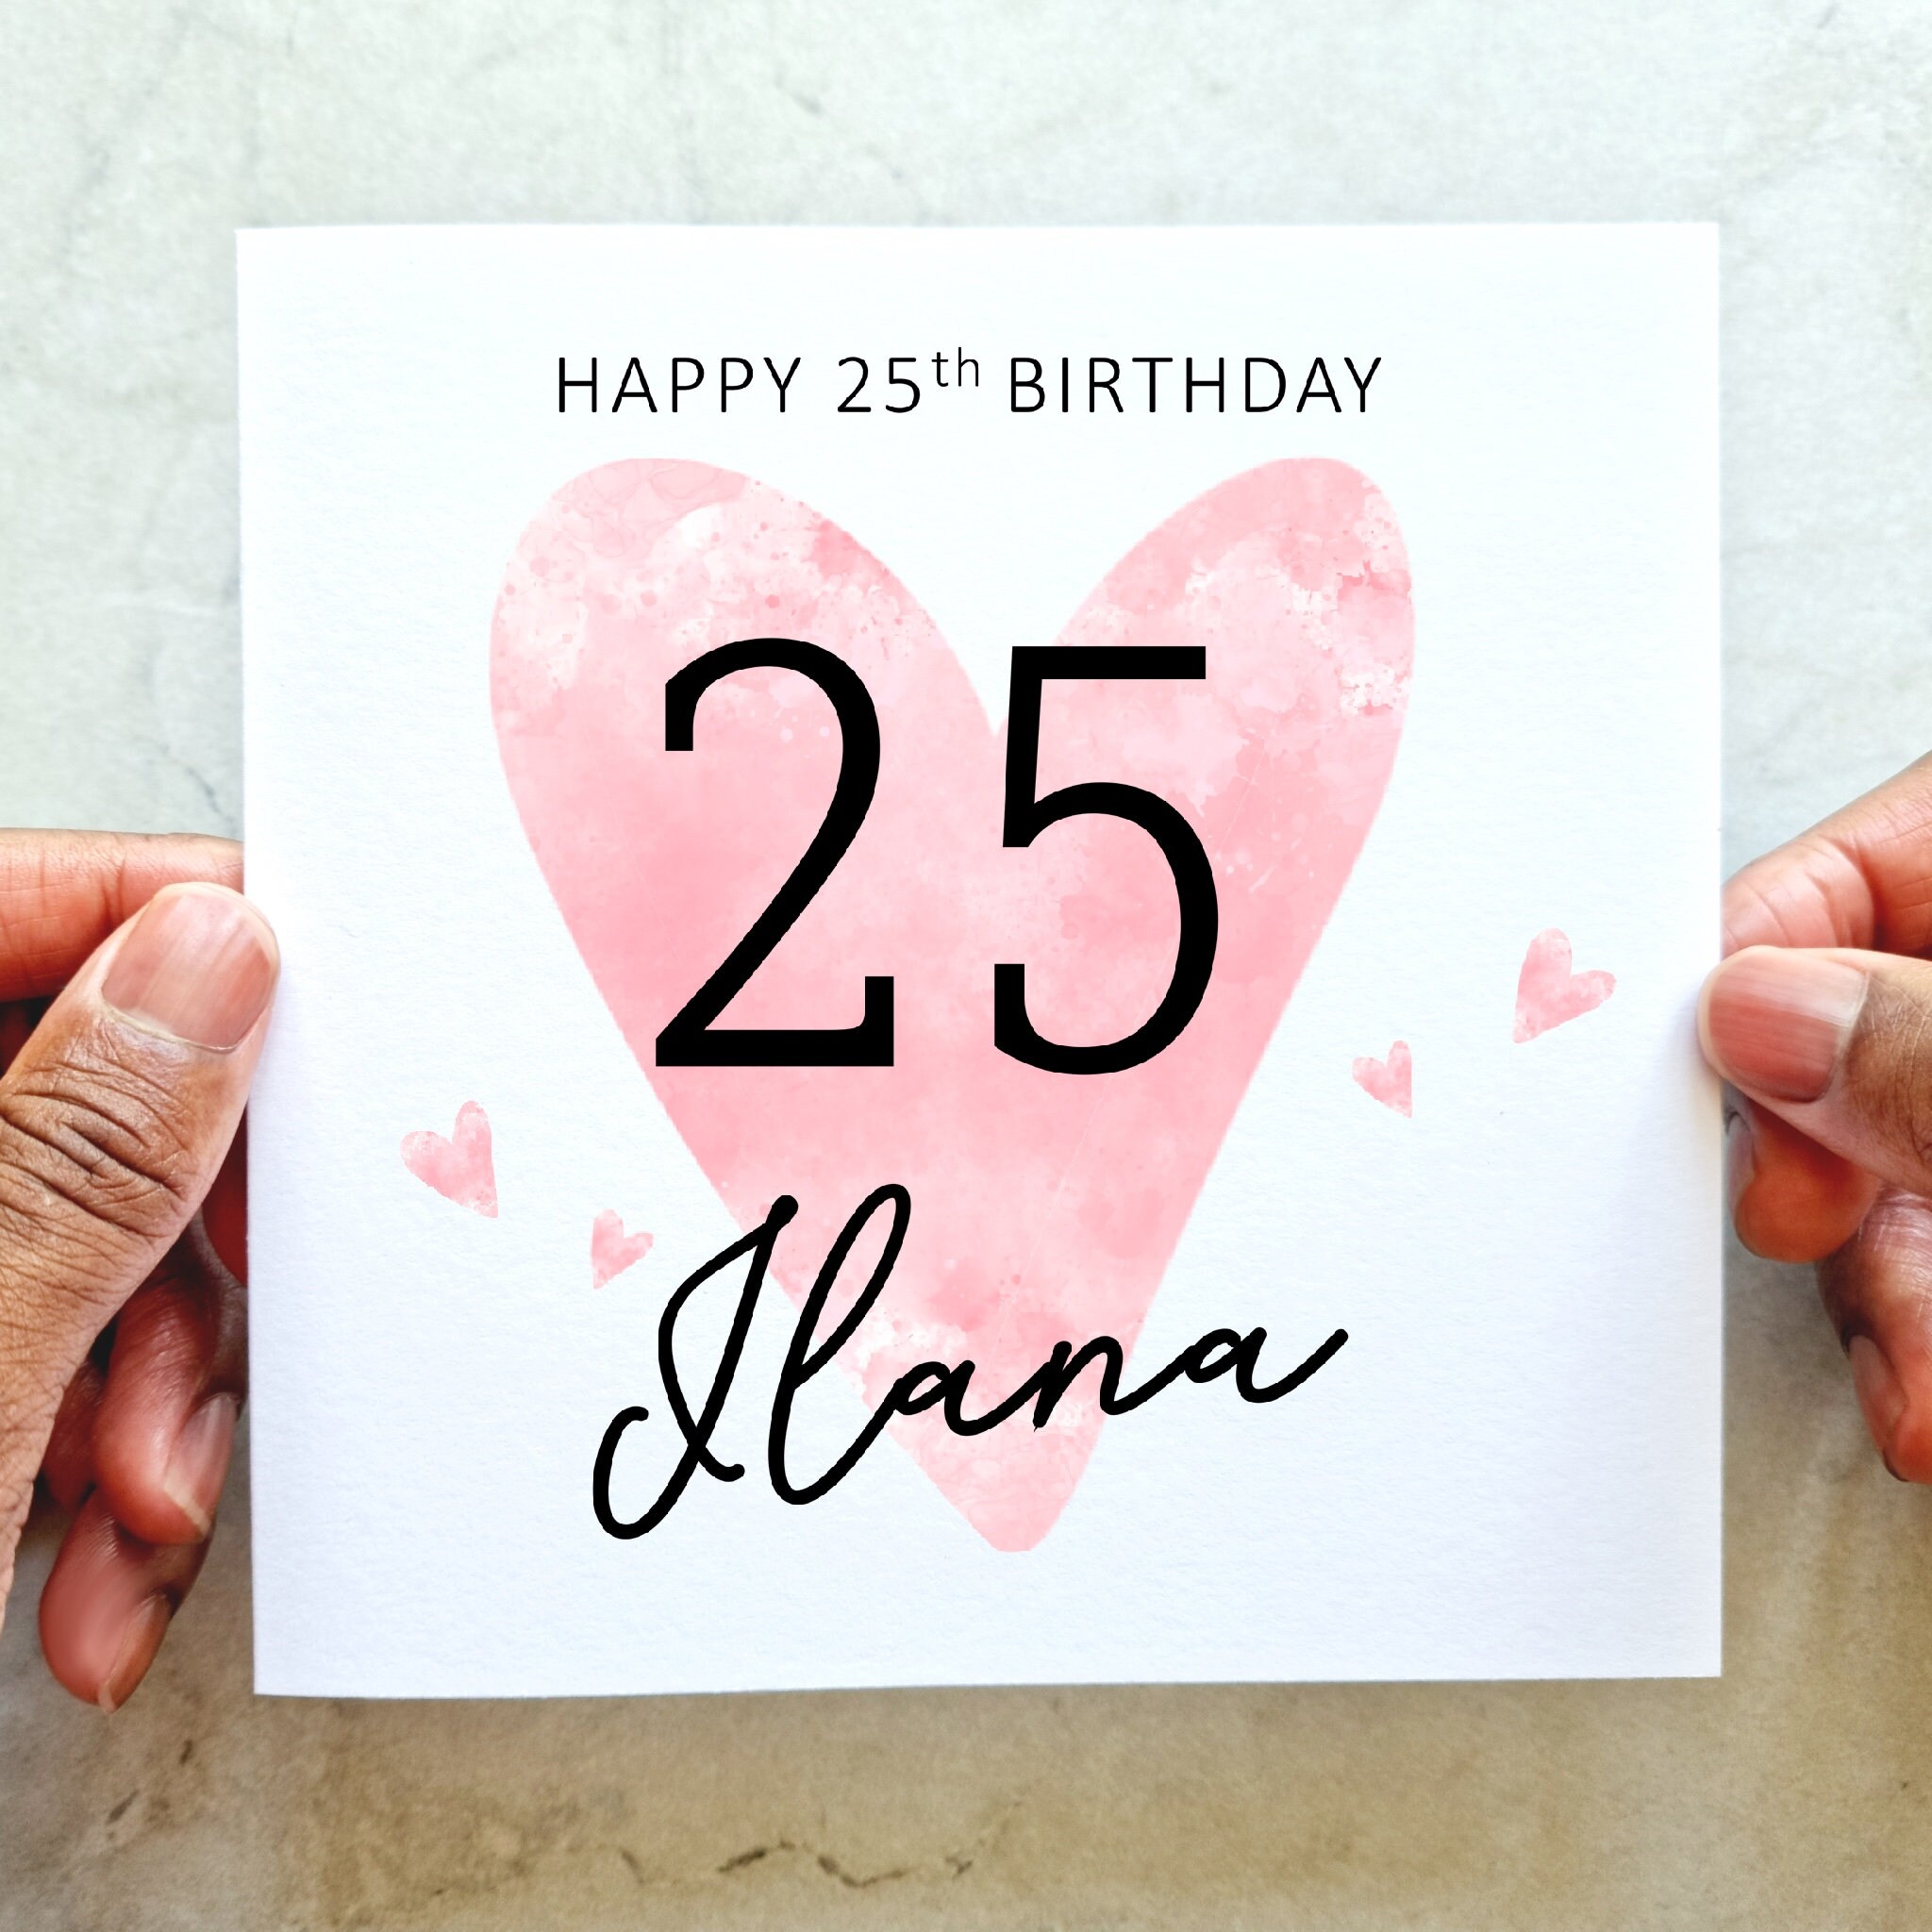 25 Best Birthday Gifts For Adult Daughter - GiftLab24